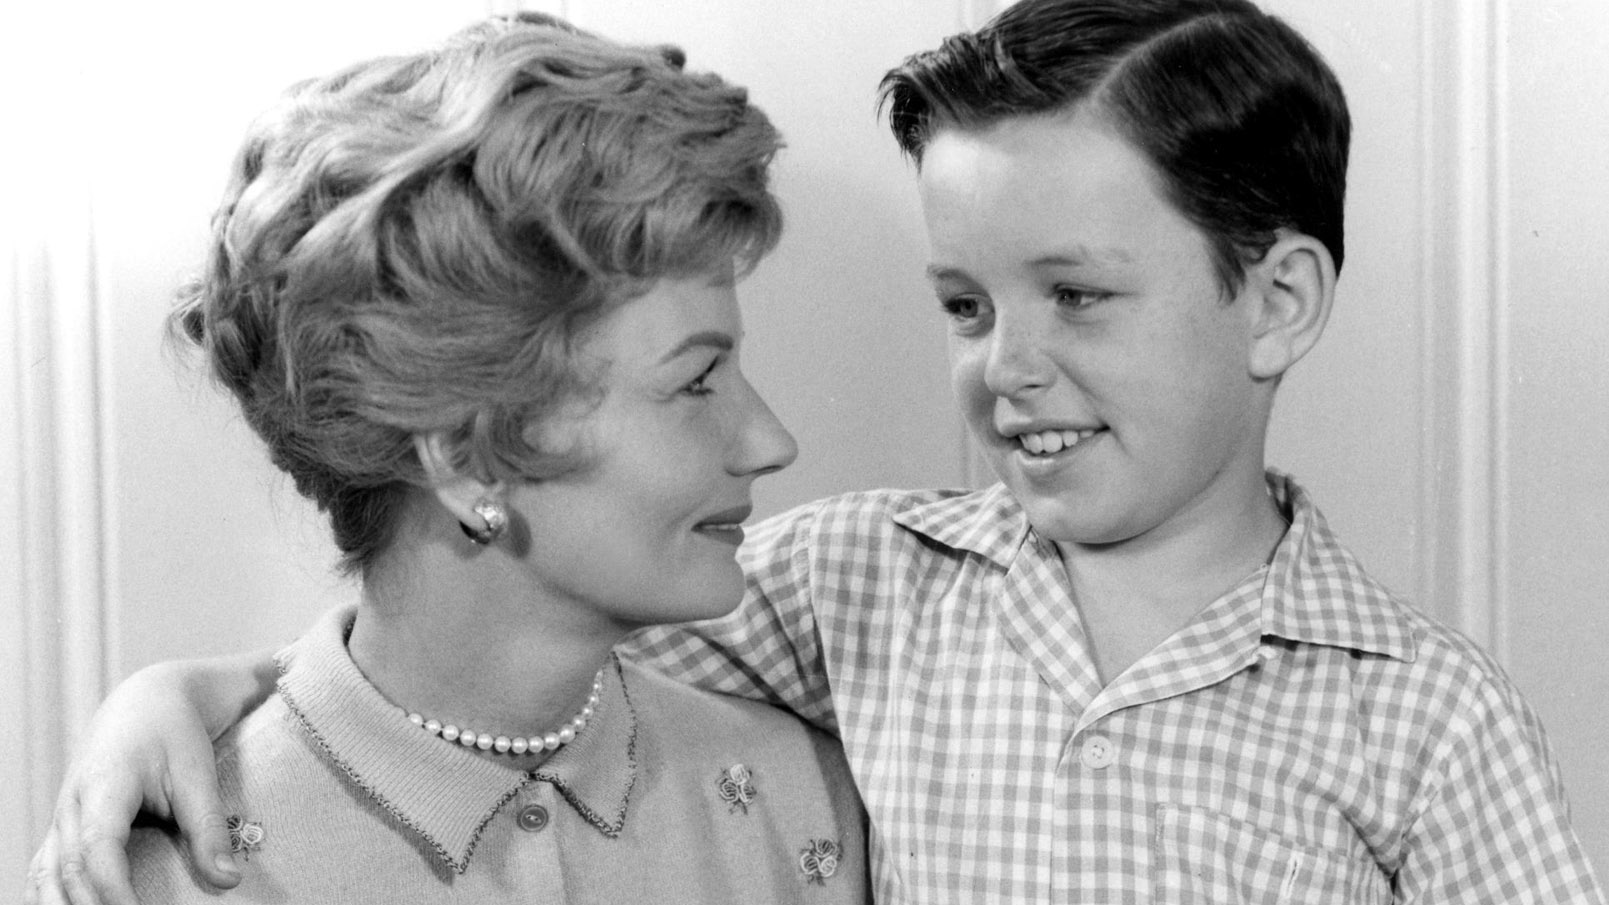 LEAVE IT TO BEAVER, Barbara Billingsley, Jerry Mathers, 